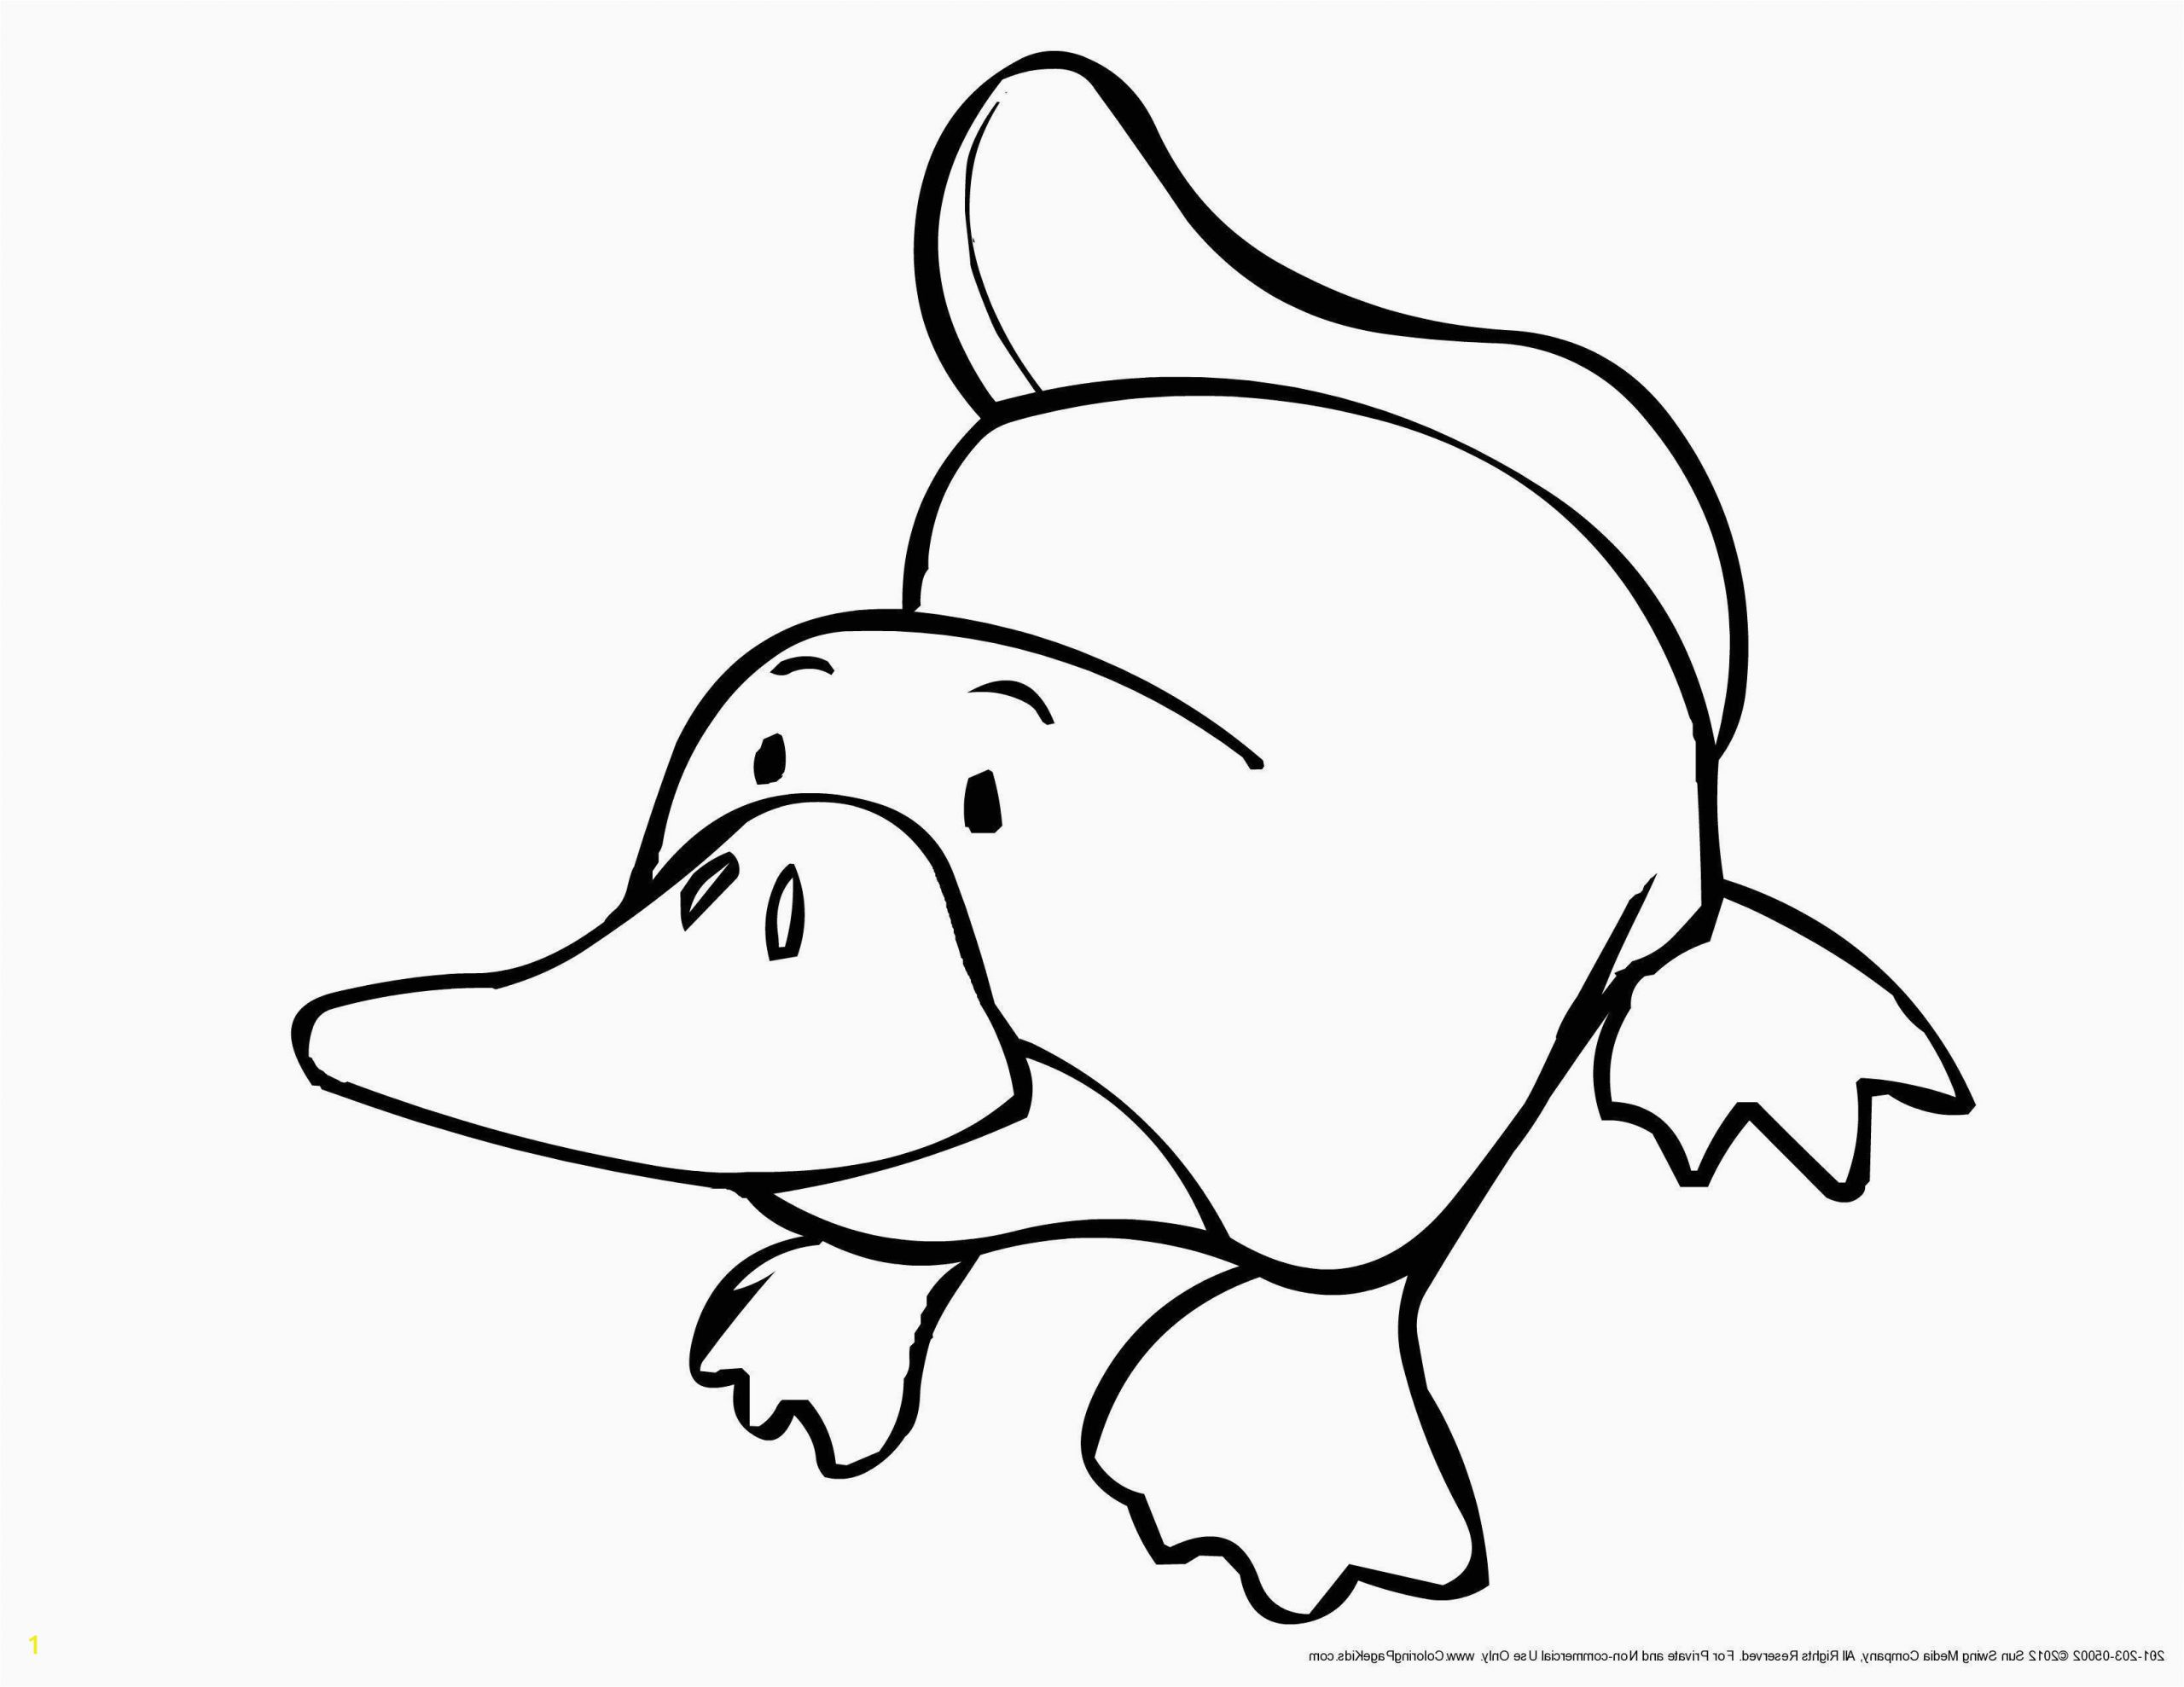 mega charizard ex coloring page best of image coloring pages page 198 jvzooreview of mega charizard ex coloring page